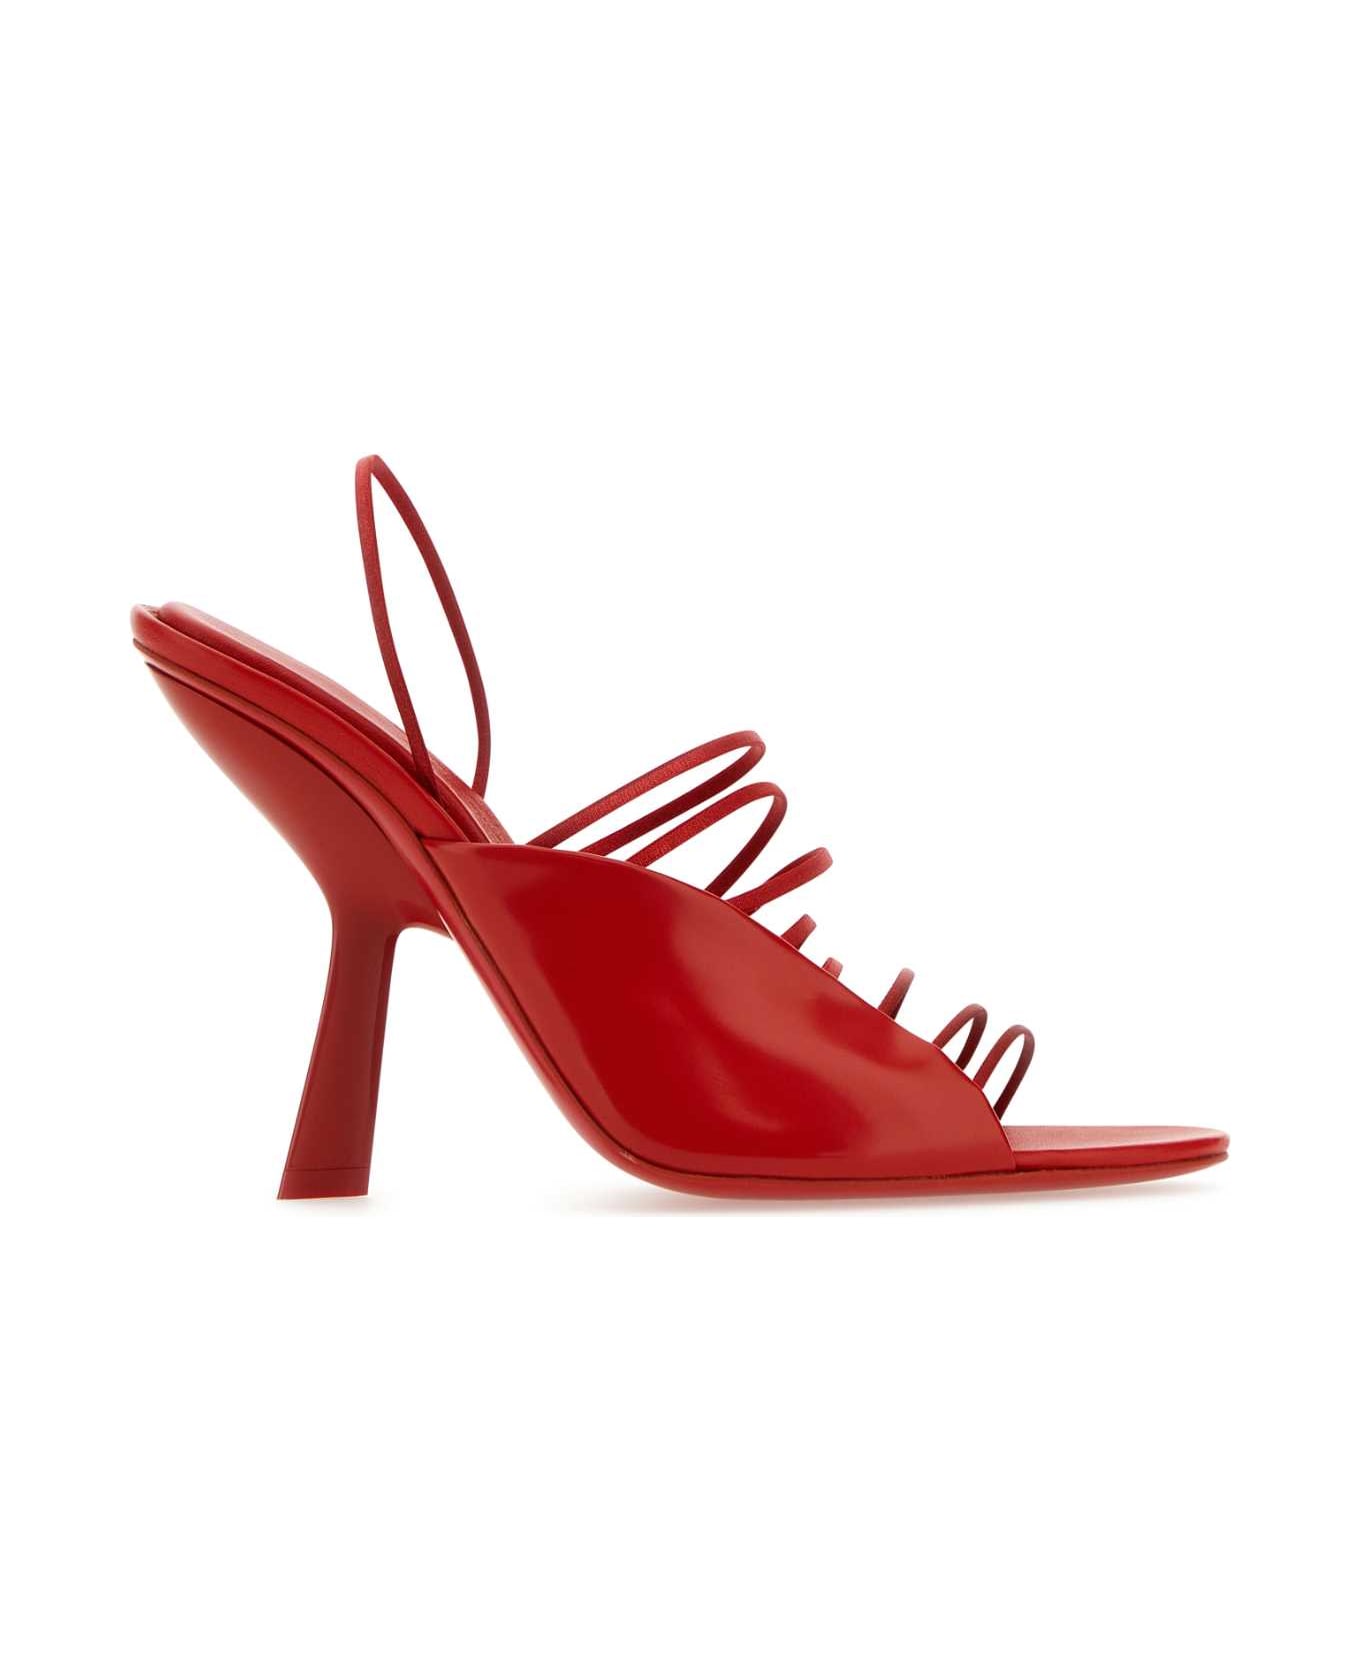 Ferragamo Red Leather Altaire Sandals - FLAMERED